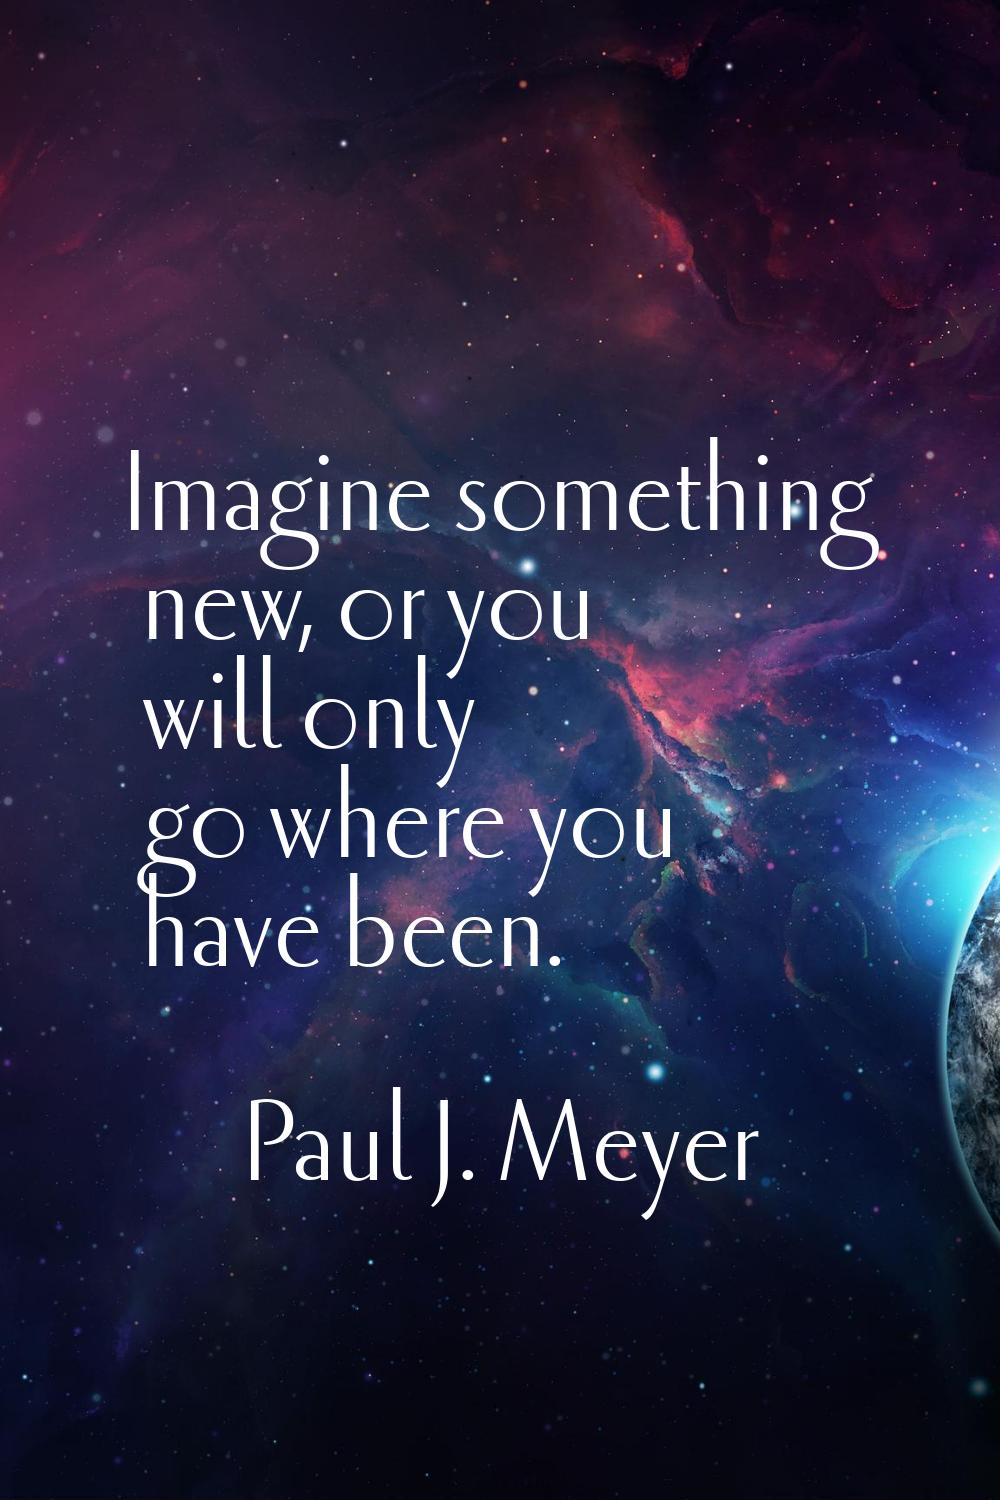 Imagine something new, or you will only go where you have been.